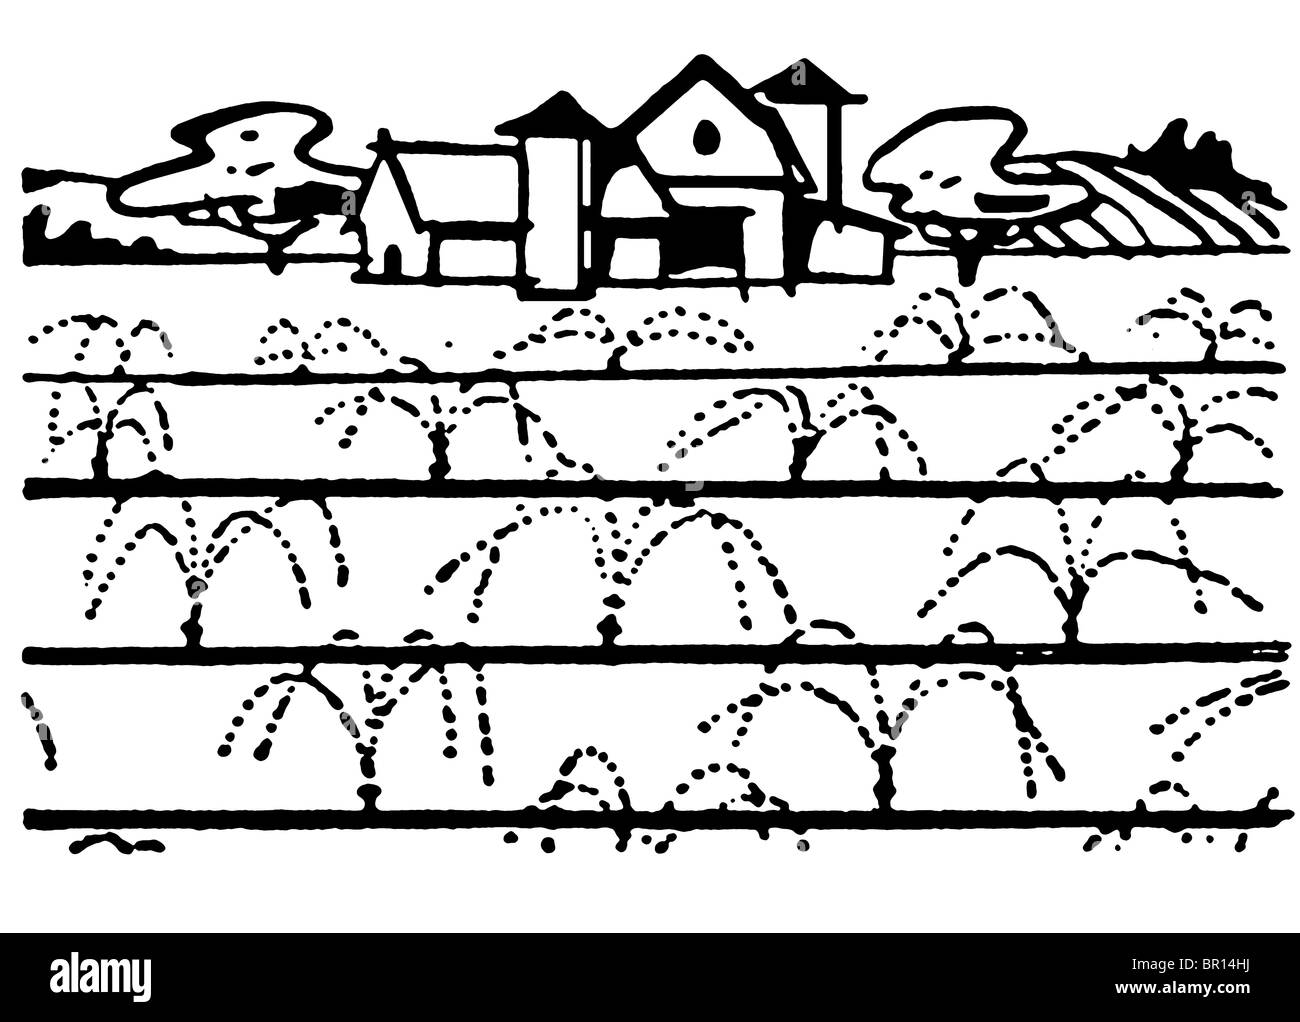 A black and white version of an illustration of a farmhouse Stock Photo